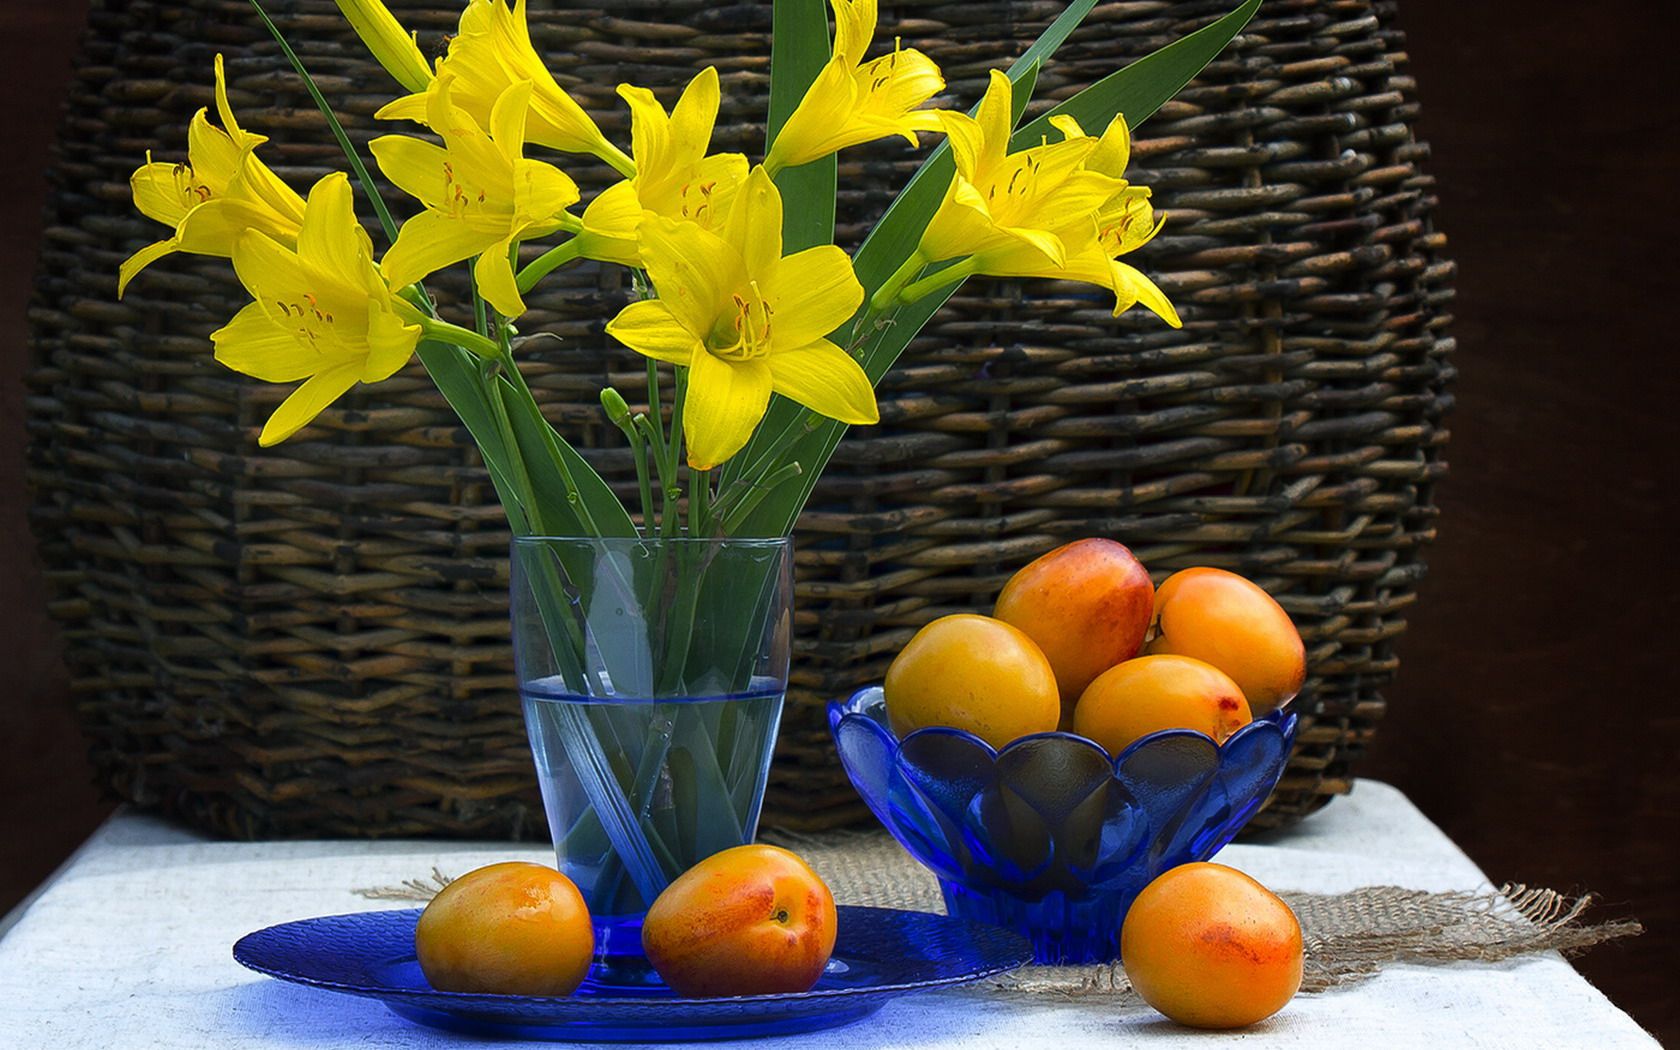 photography, still life, flower, fruit, lily, wicker, yellow flower lock screen backgrounds